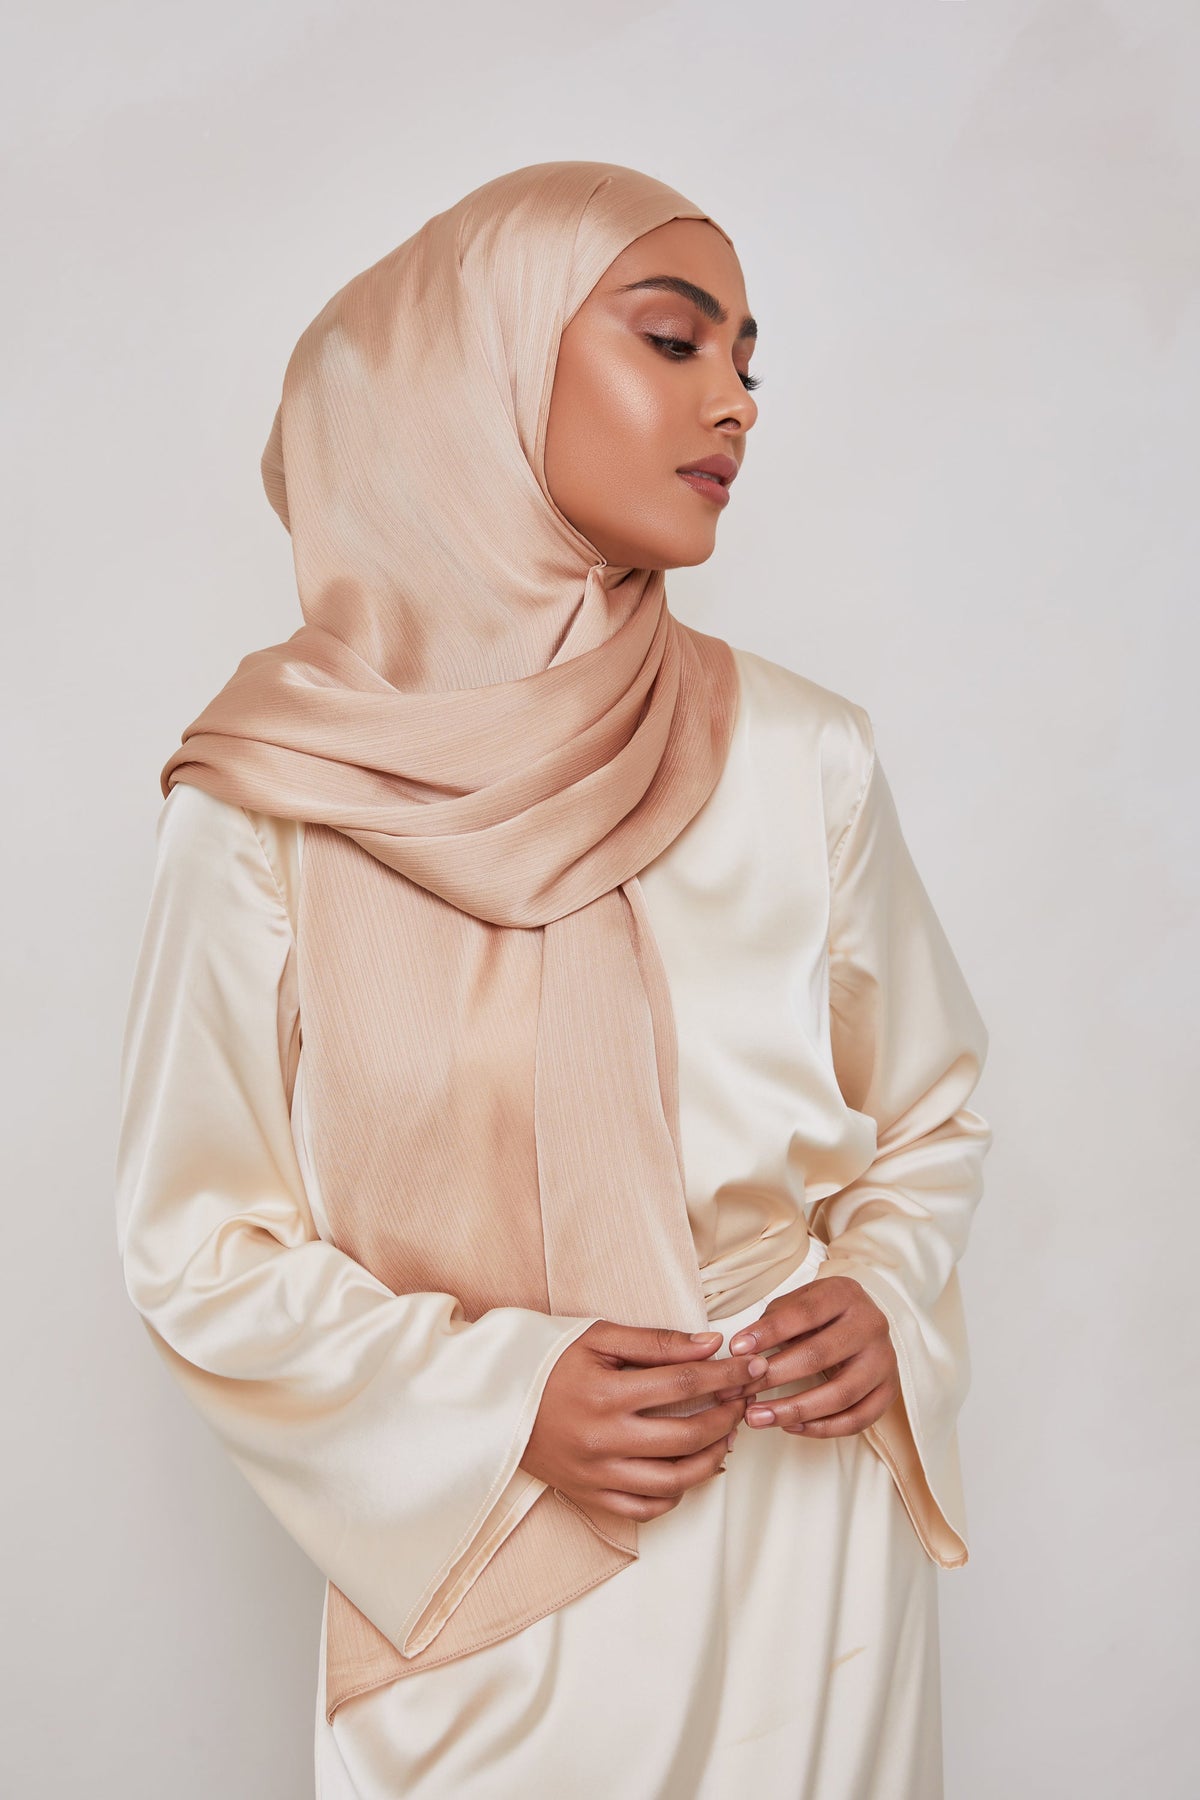 TEXTURE Satin Crepe Hijab - Ginger Crepe Veiled Collection 